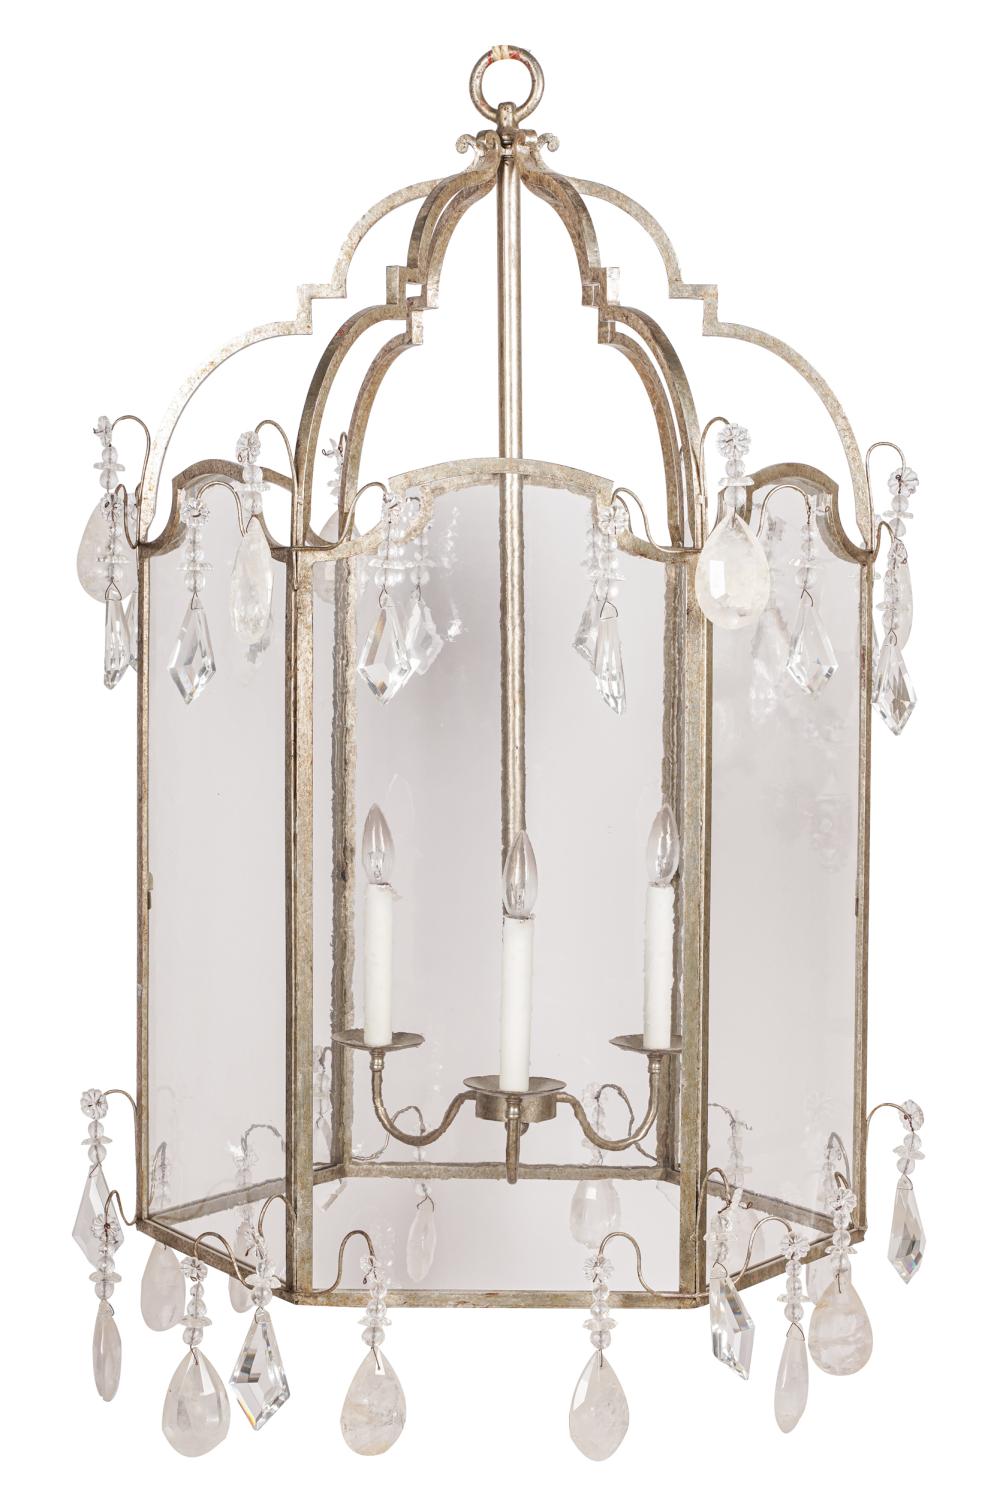 METAL & GLASS CHANDELIERwith crystal